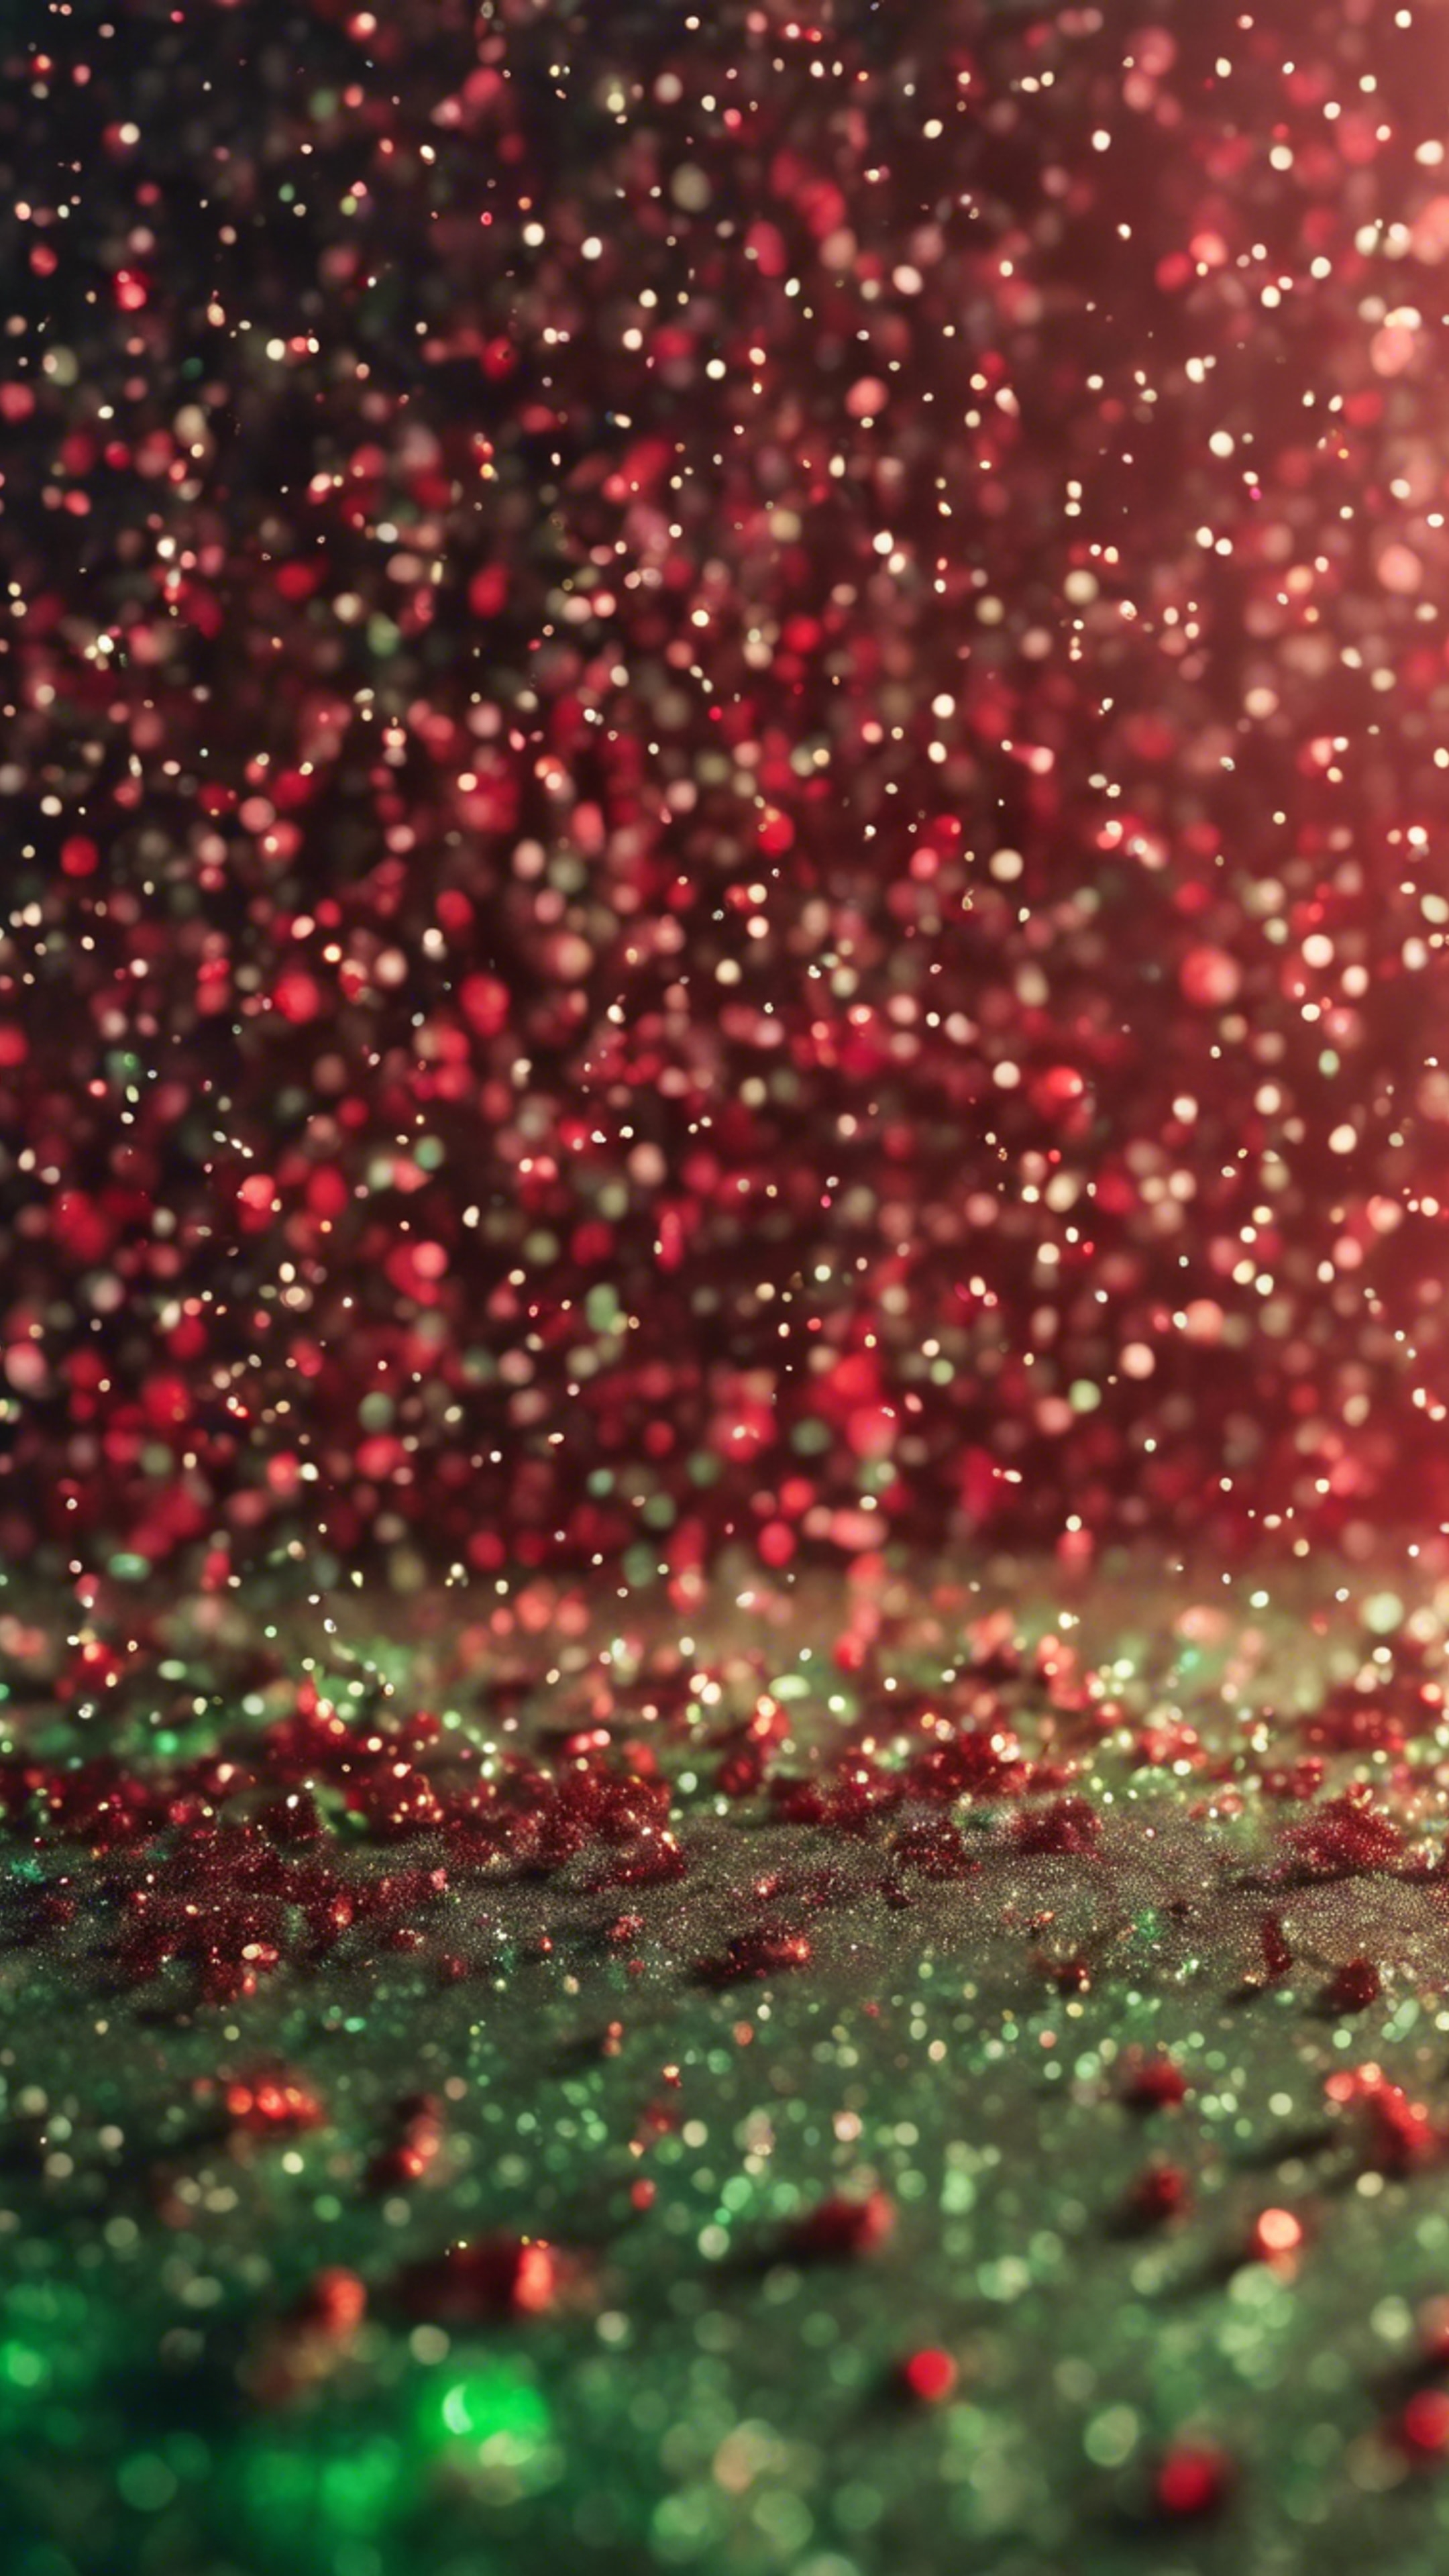 Tiny green and red glitter particles scattered randomly Kertas dinding[e9e8f5a2023d489ba4c1]